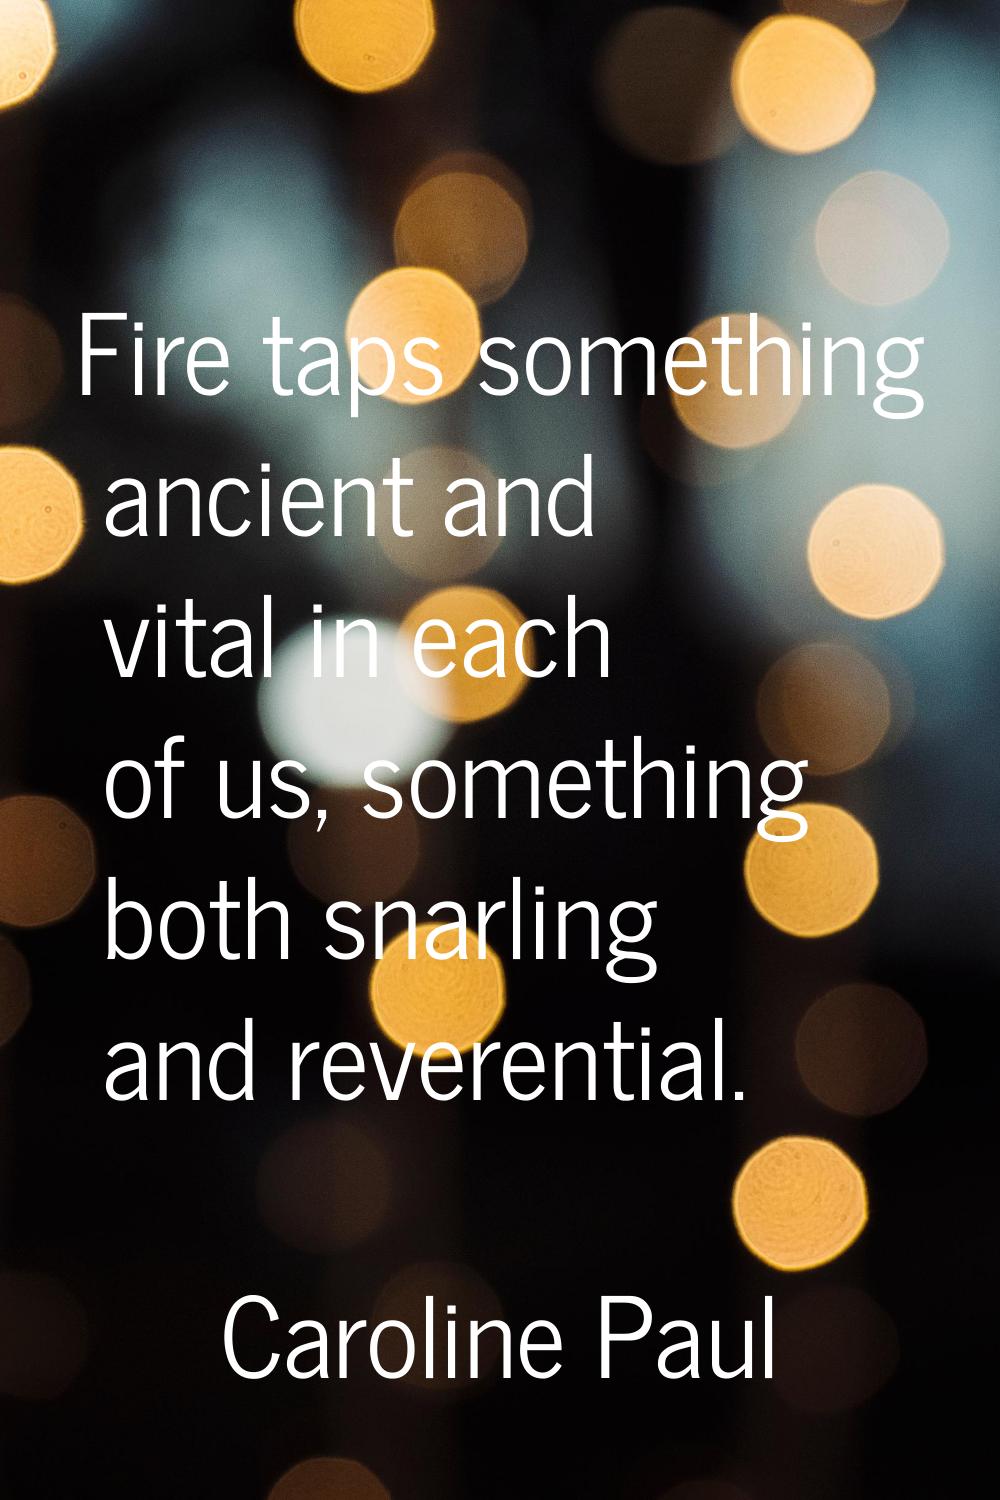 Fire taps something ancient and vital in each of us, something both snarling and reverential.